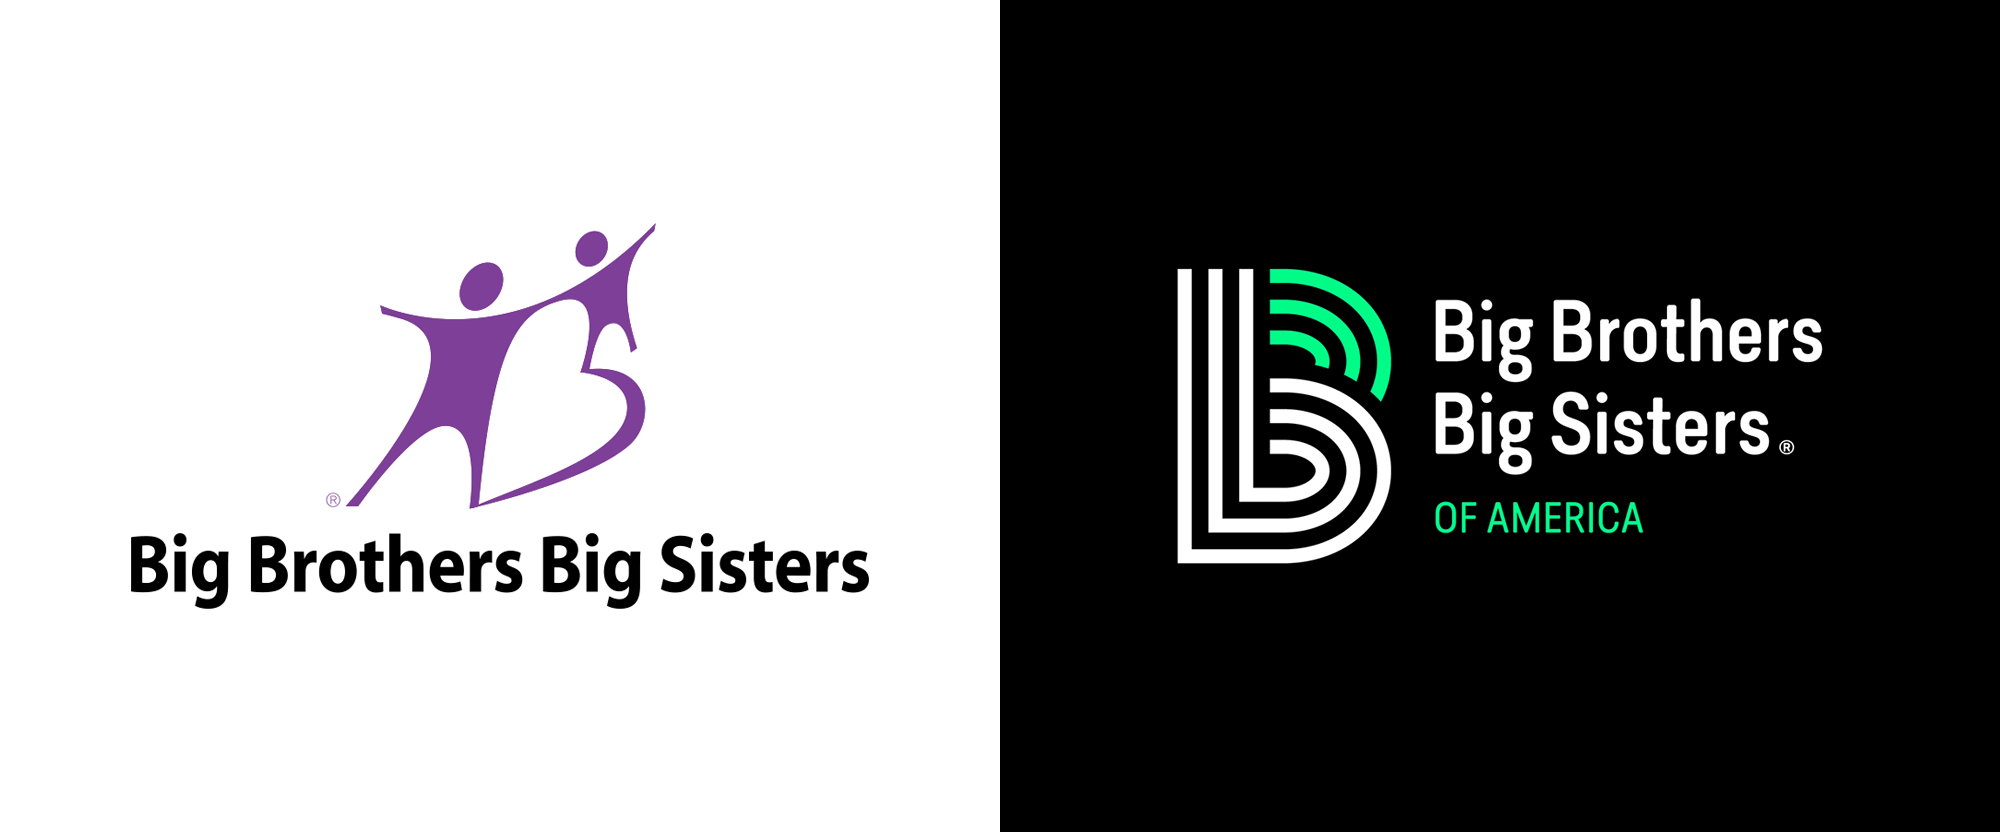 New Logo and Identity for Big Brothers Big Sisters by Barkley